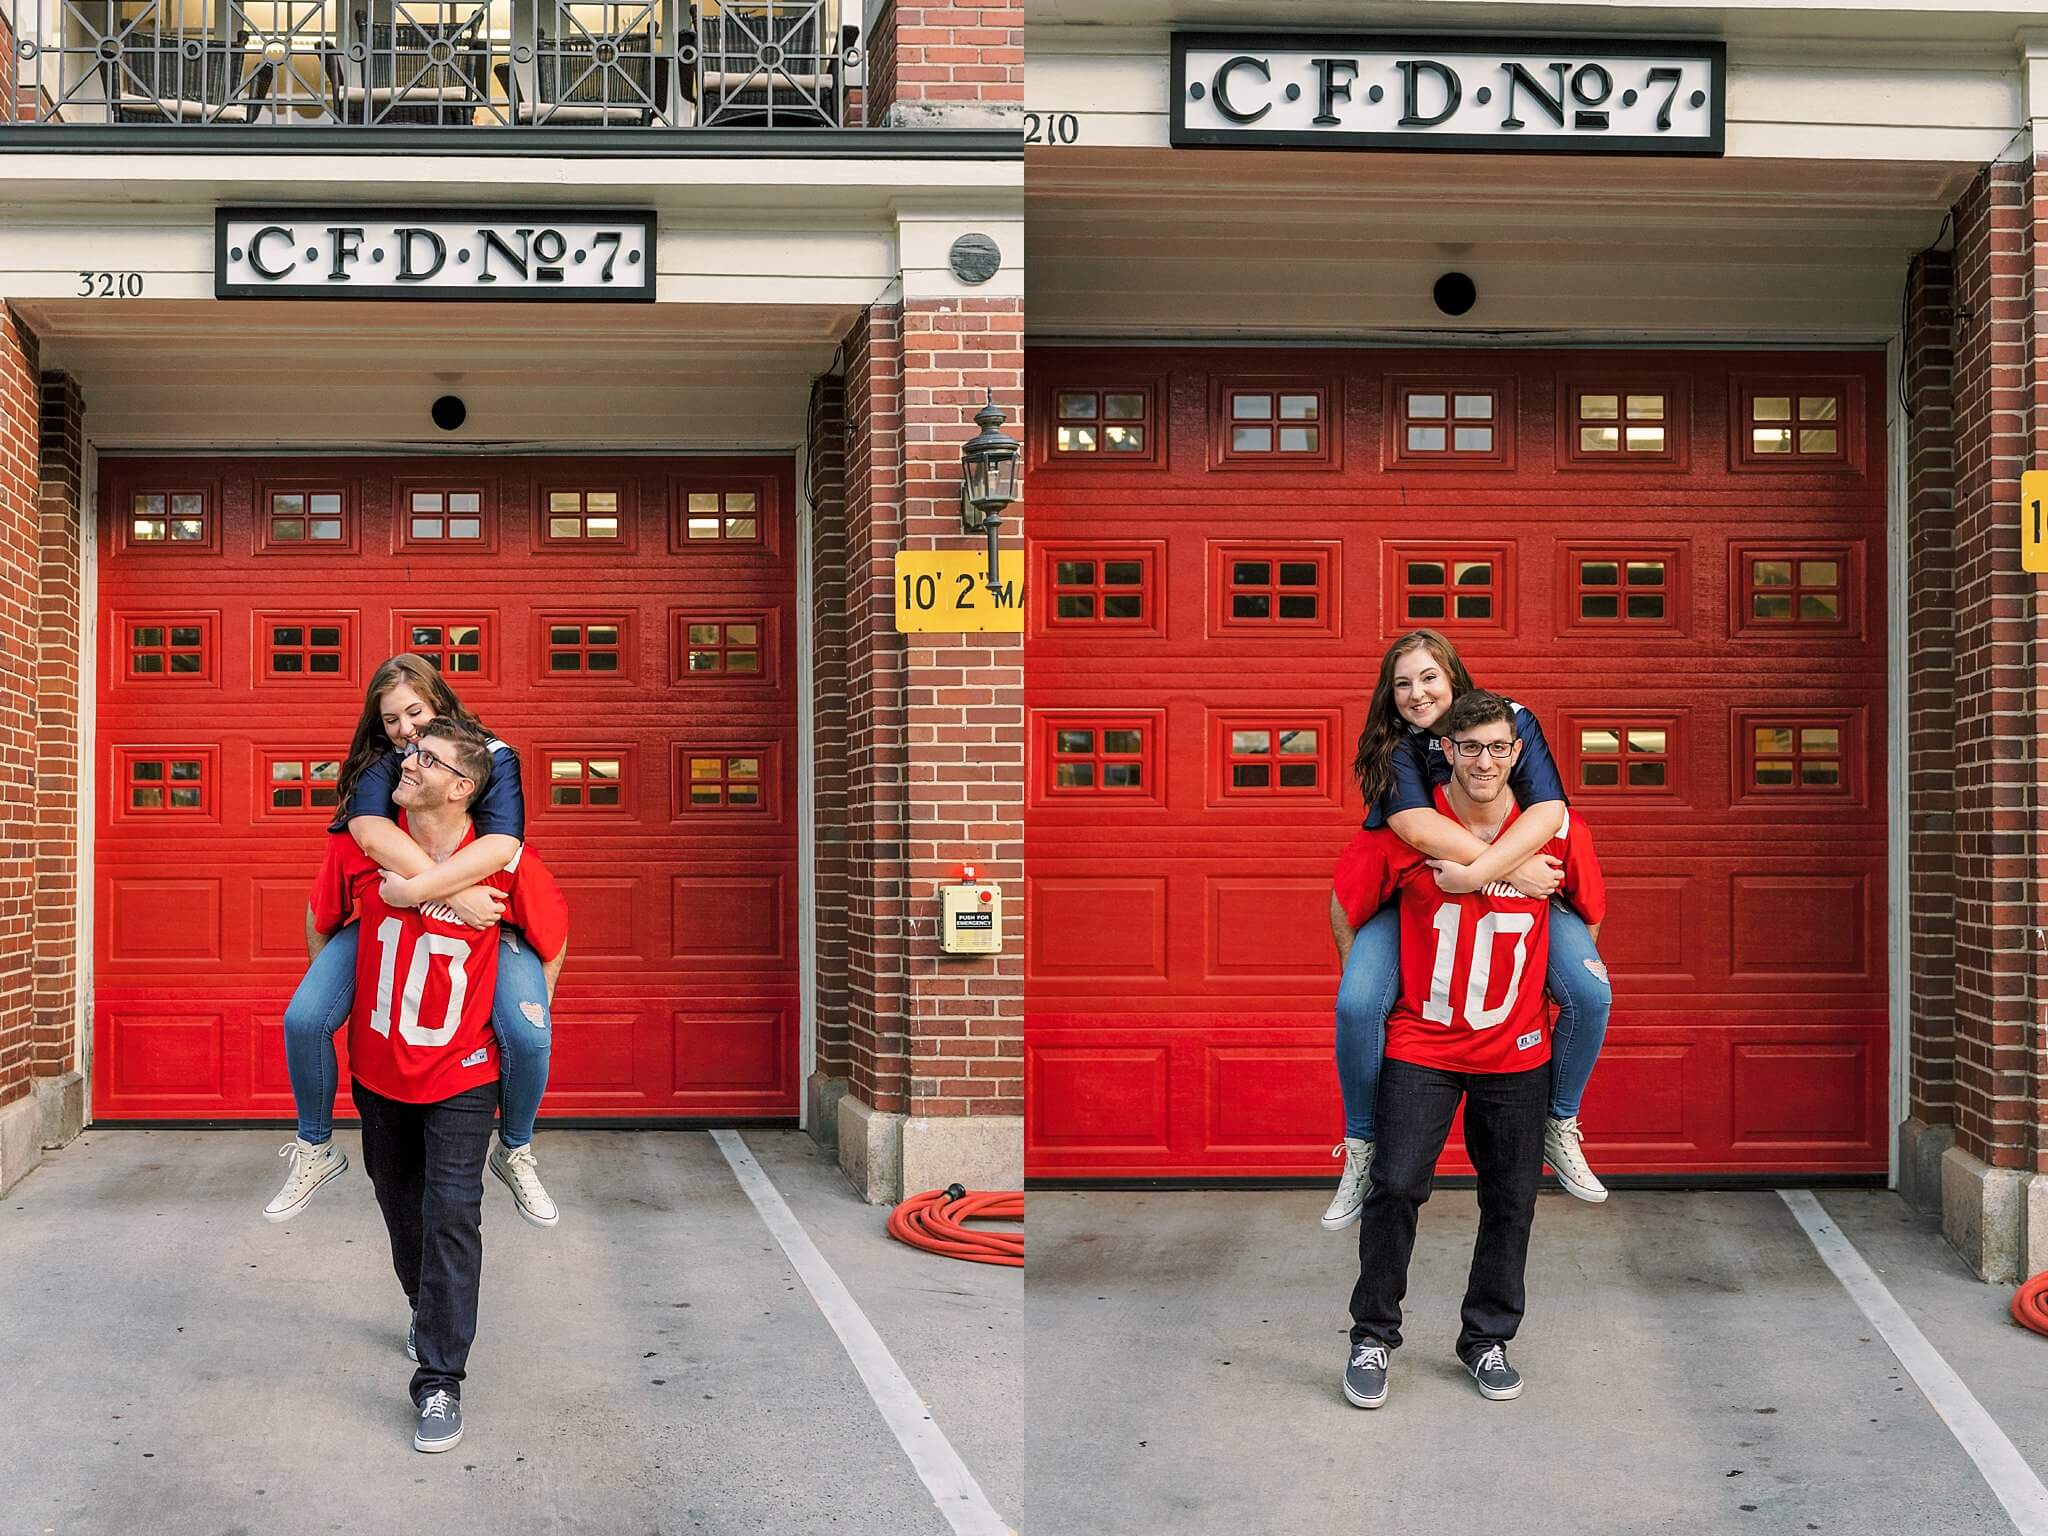 uptown charlotte engagement session, couple in ole miss jerseys, firehouse